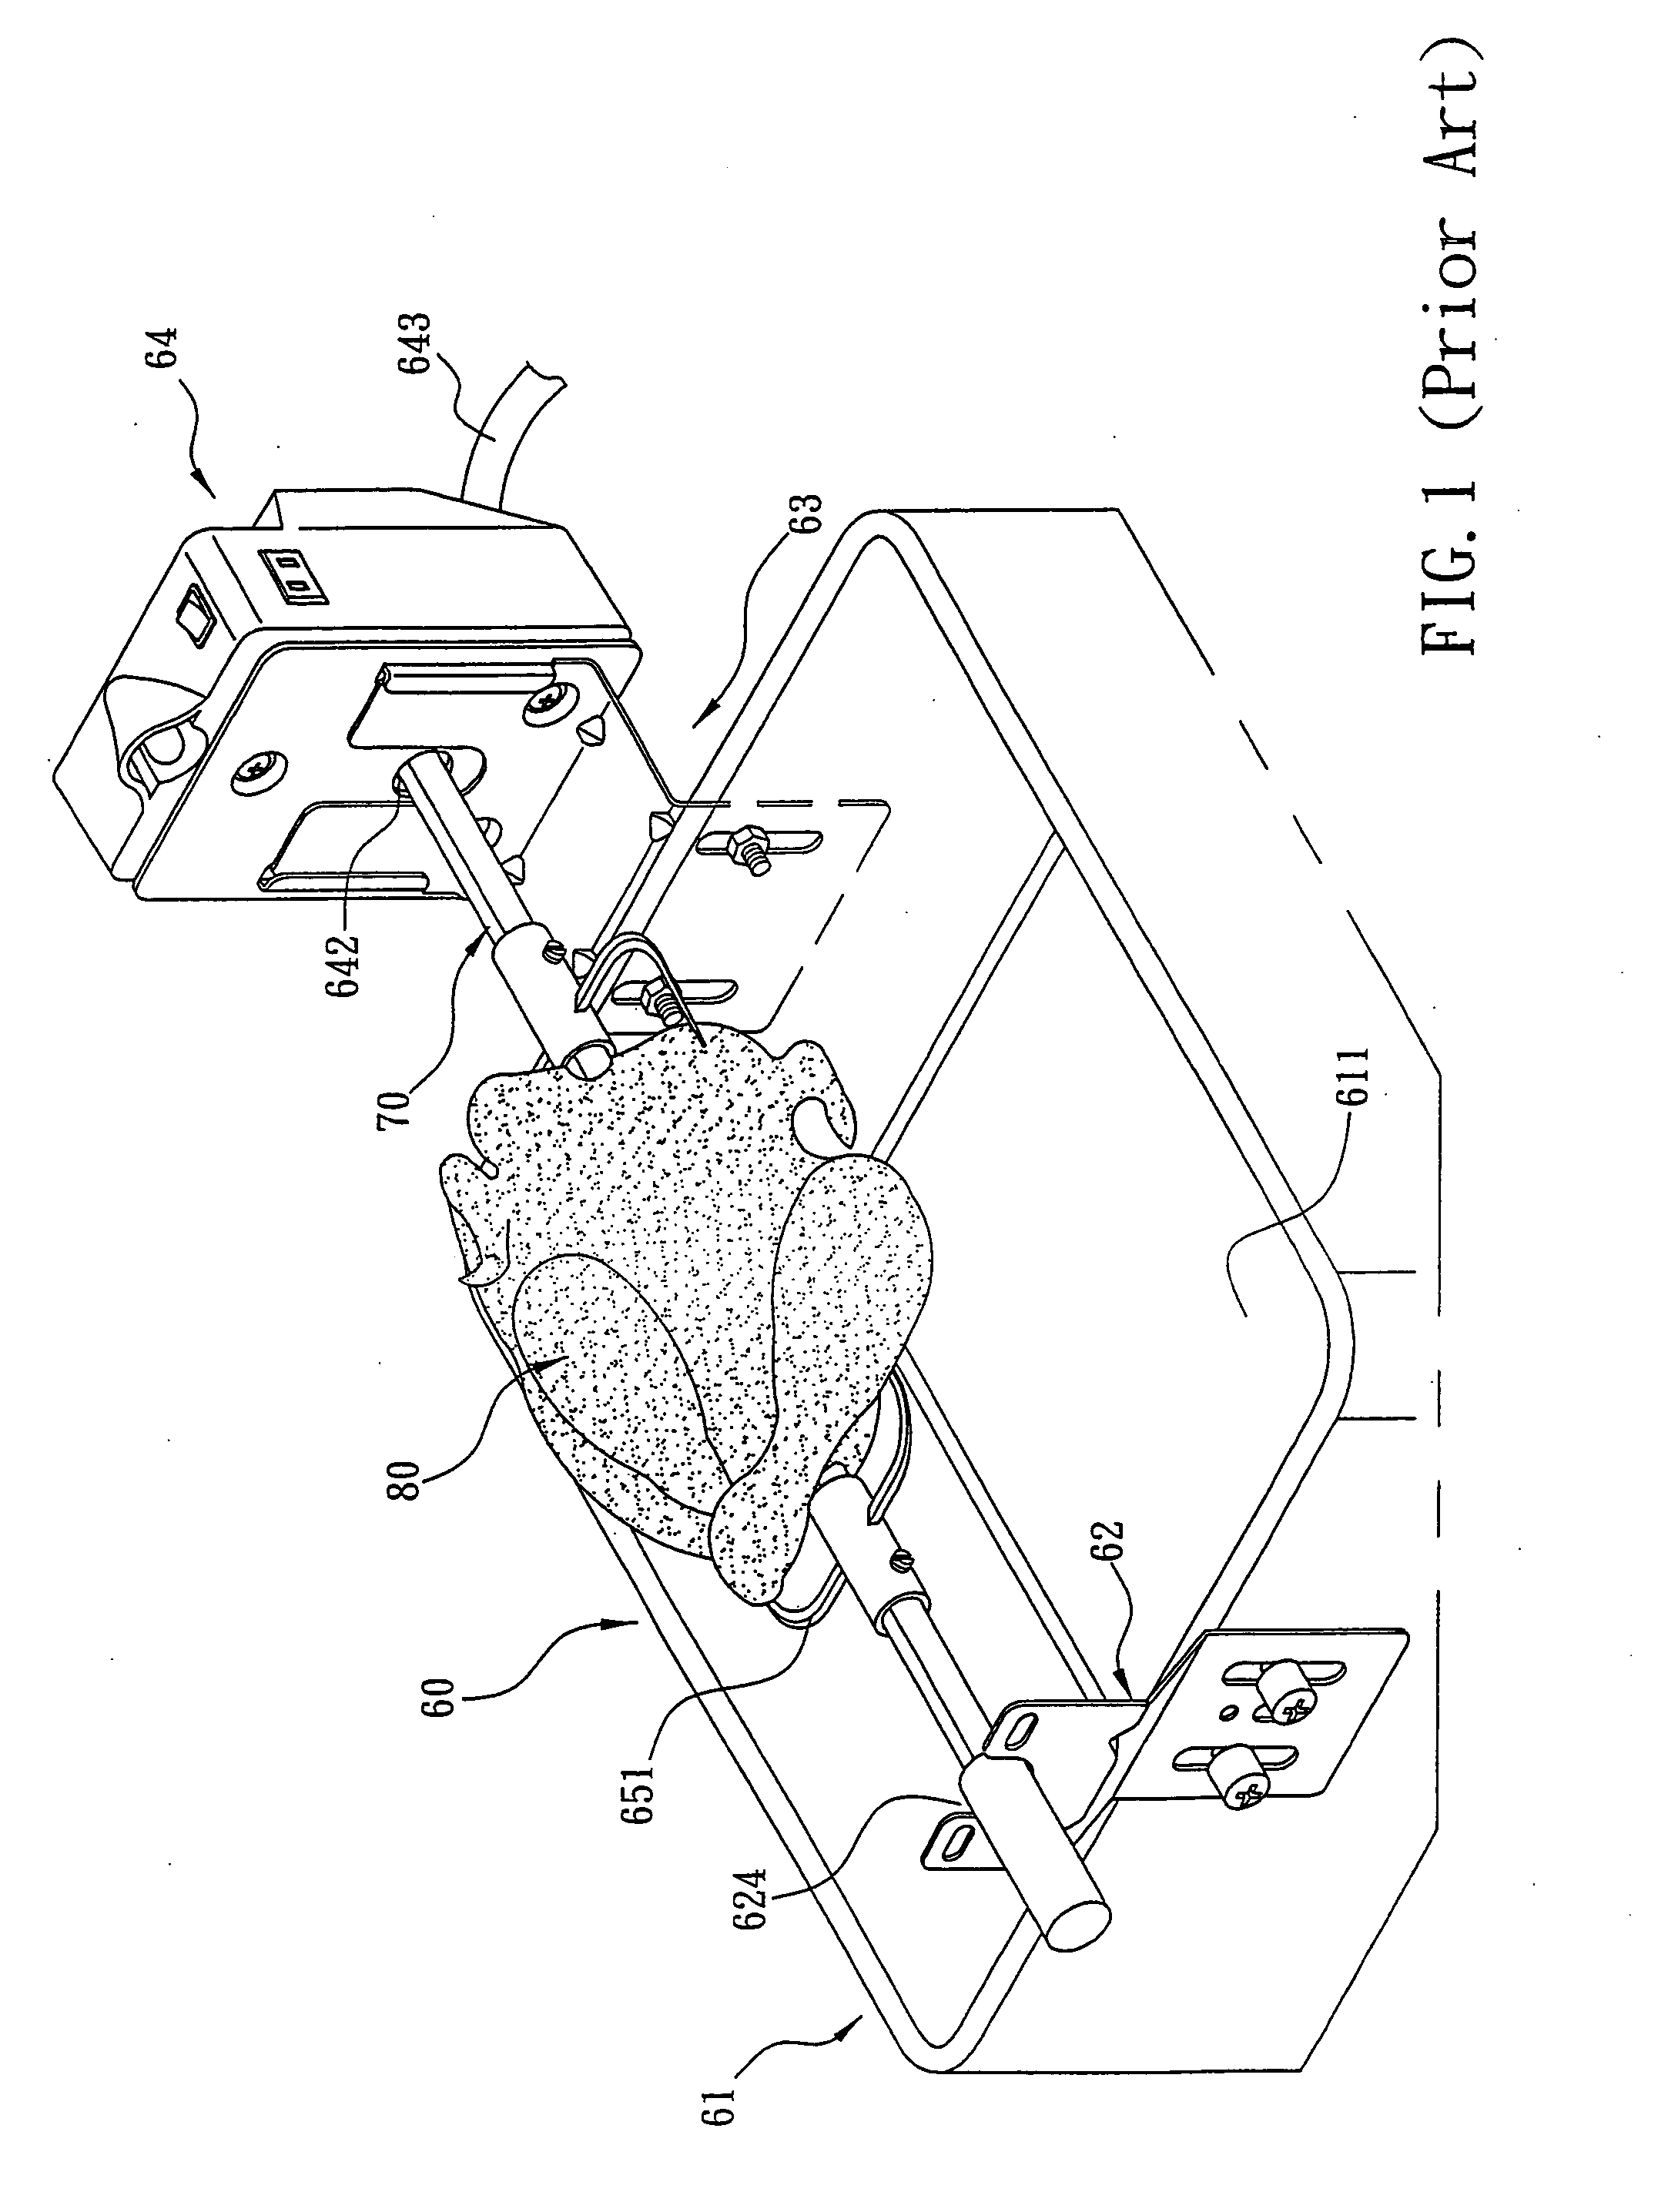 Water-repellent motor assembly for rotisserie and casing thereof